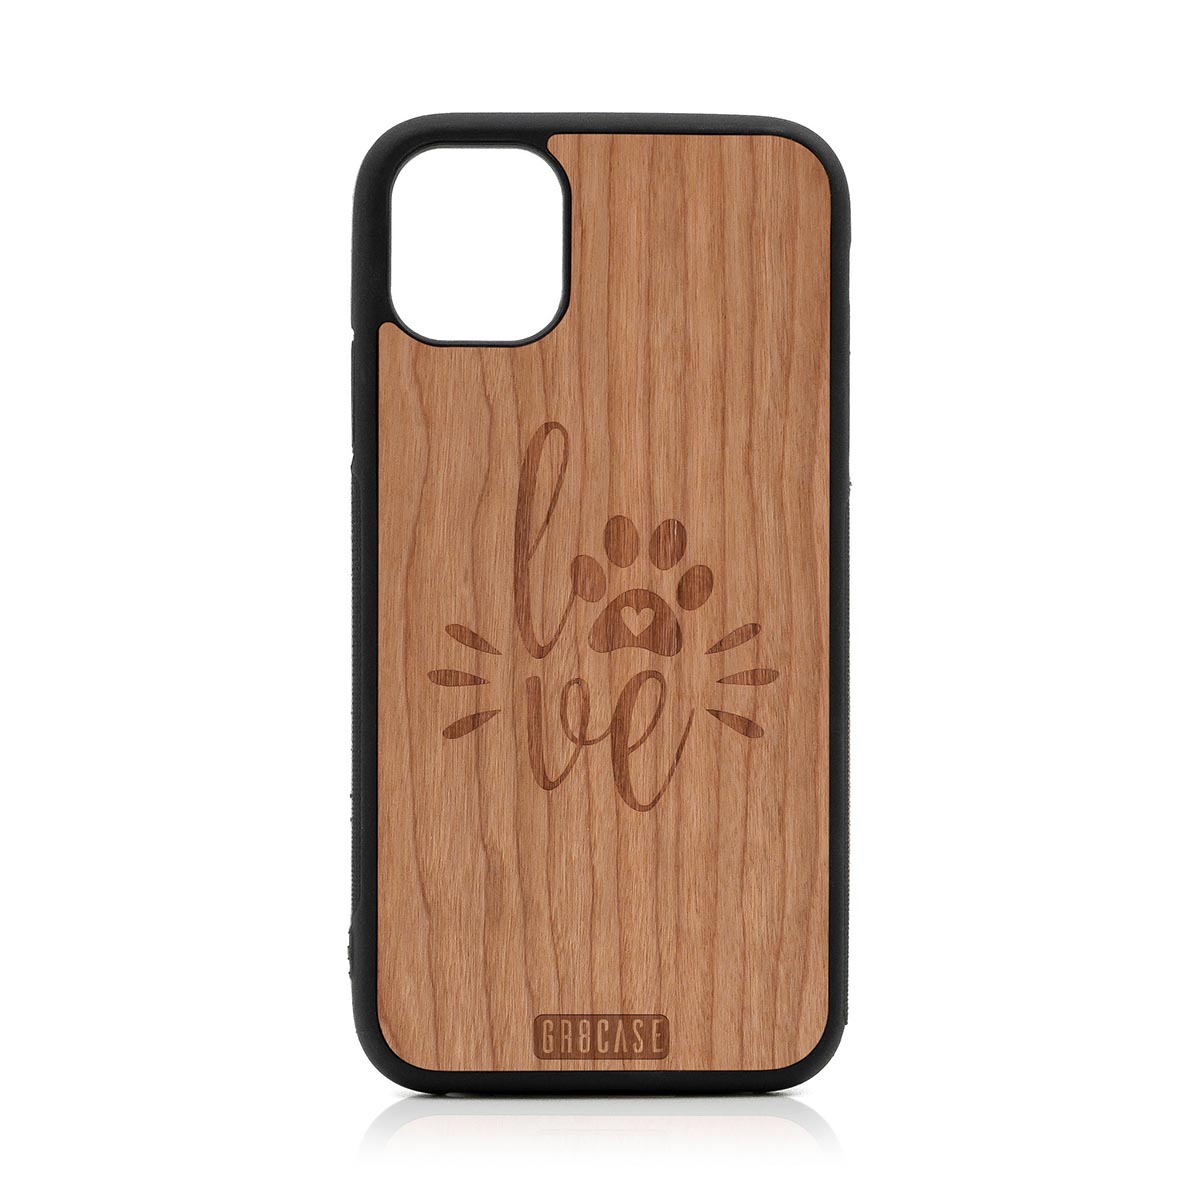 Paw Love Design Wood Case For iPhone 11 by GR8CASE